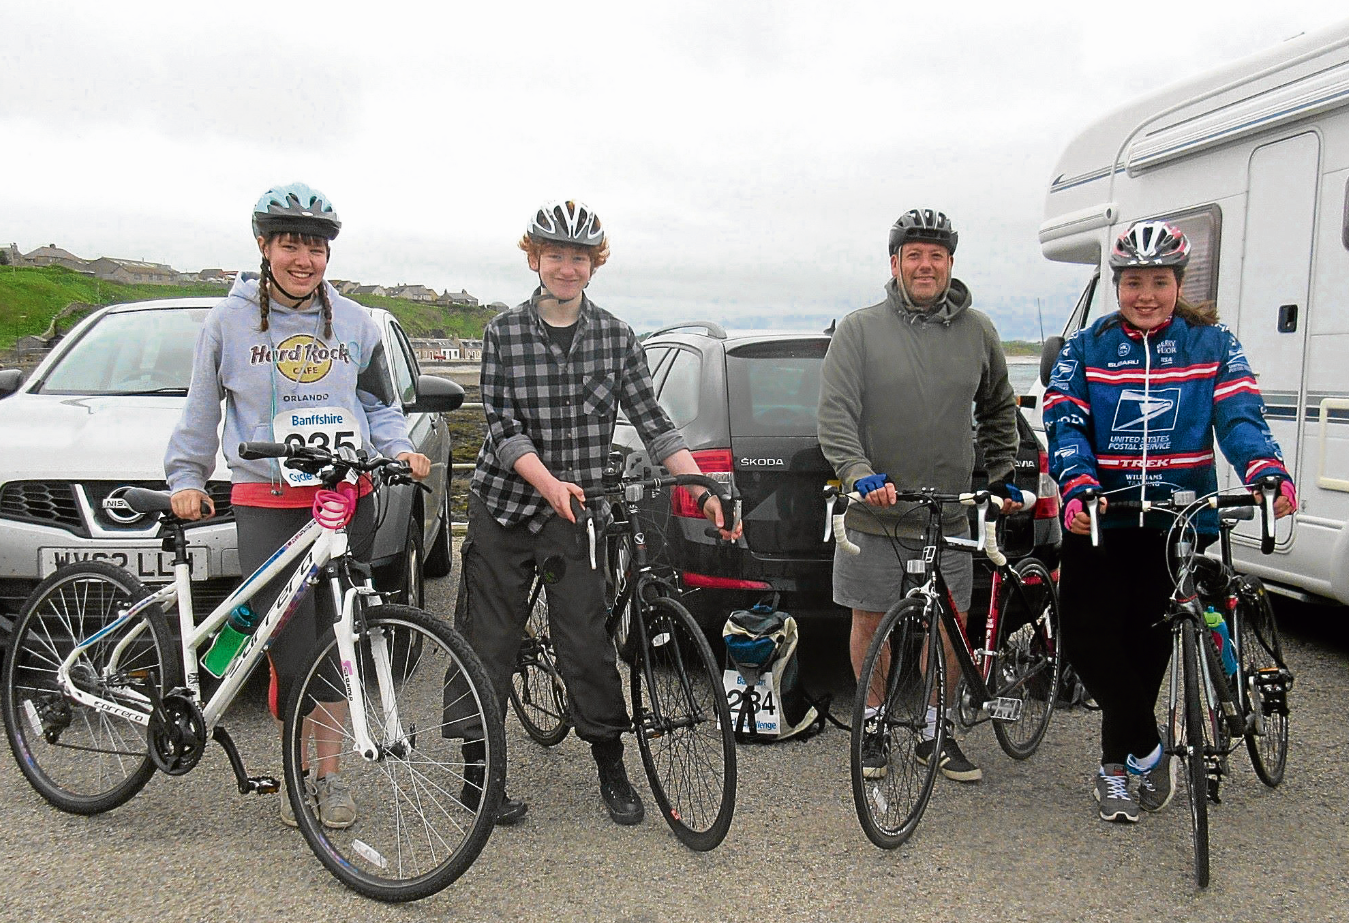 Contestants taking part in last year’s Banff Cycle Challenge, which takes place again next month